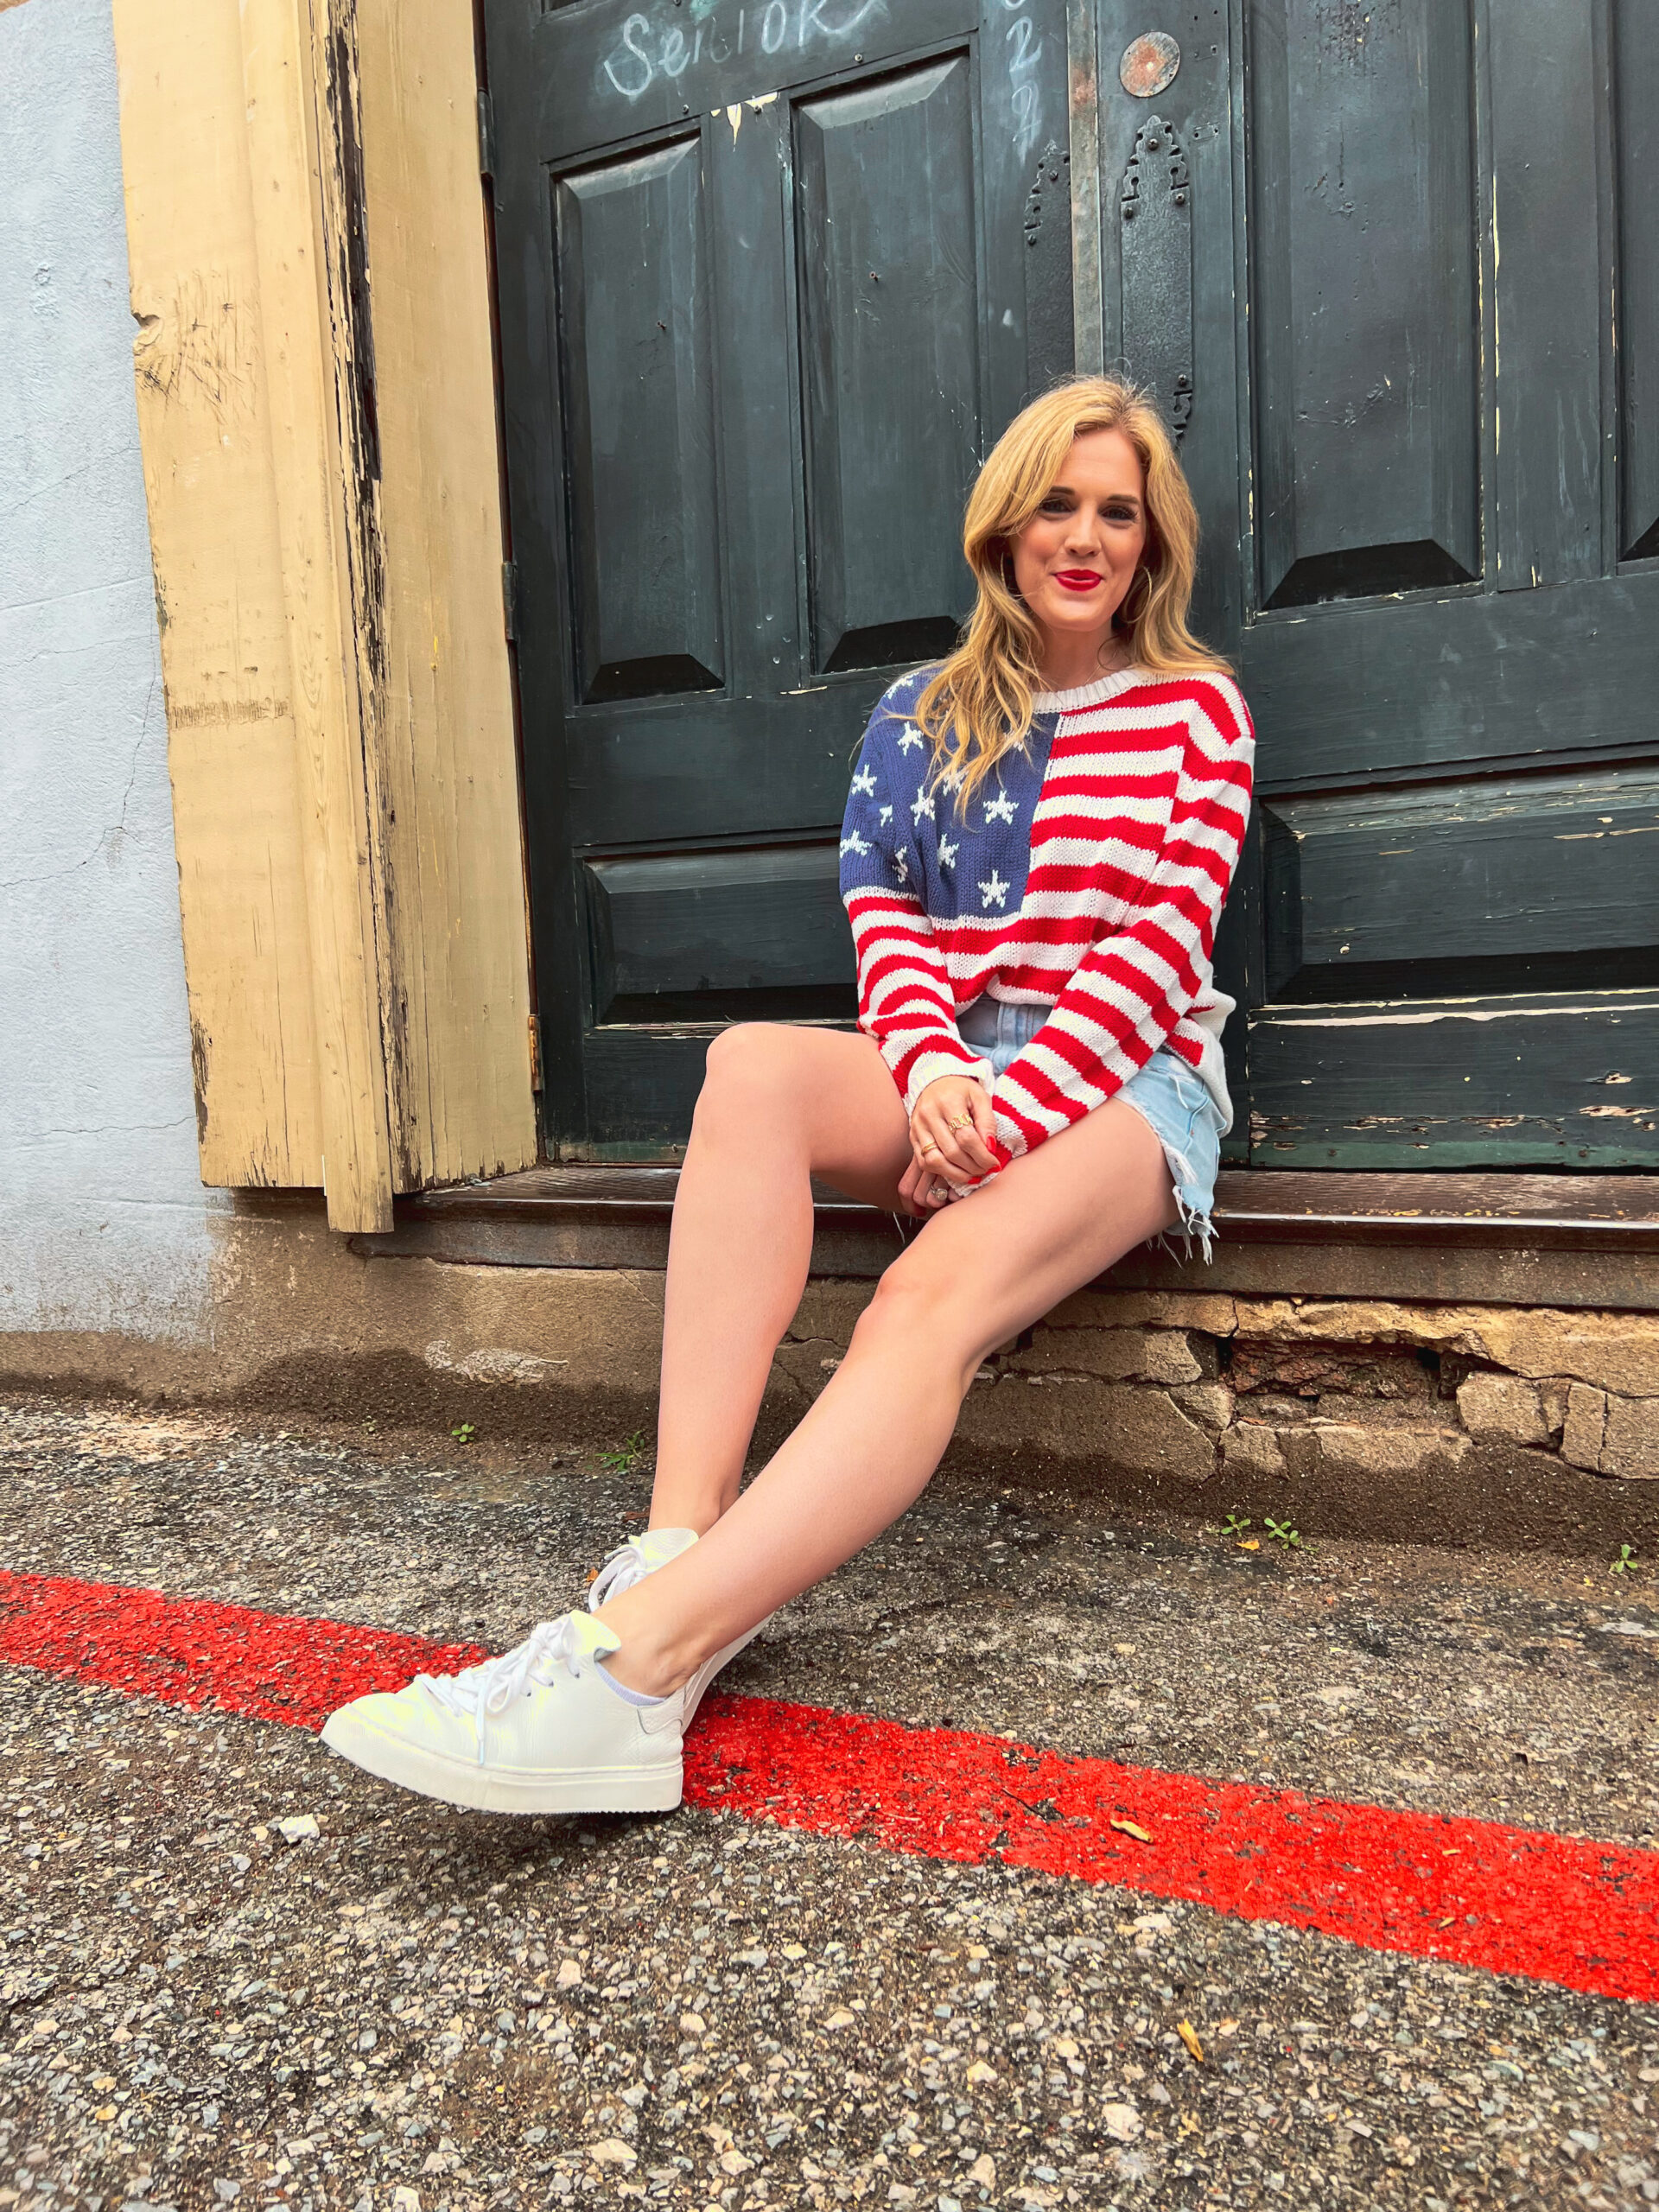 Hey Y'all! I am a Texas girl with a love for fashion and traveling. Check out my blog for fashion ideas, tips and tricks for traveling, and everything else in between!